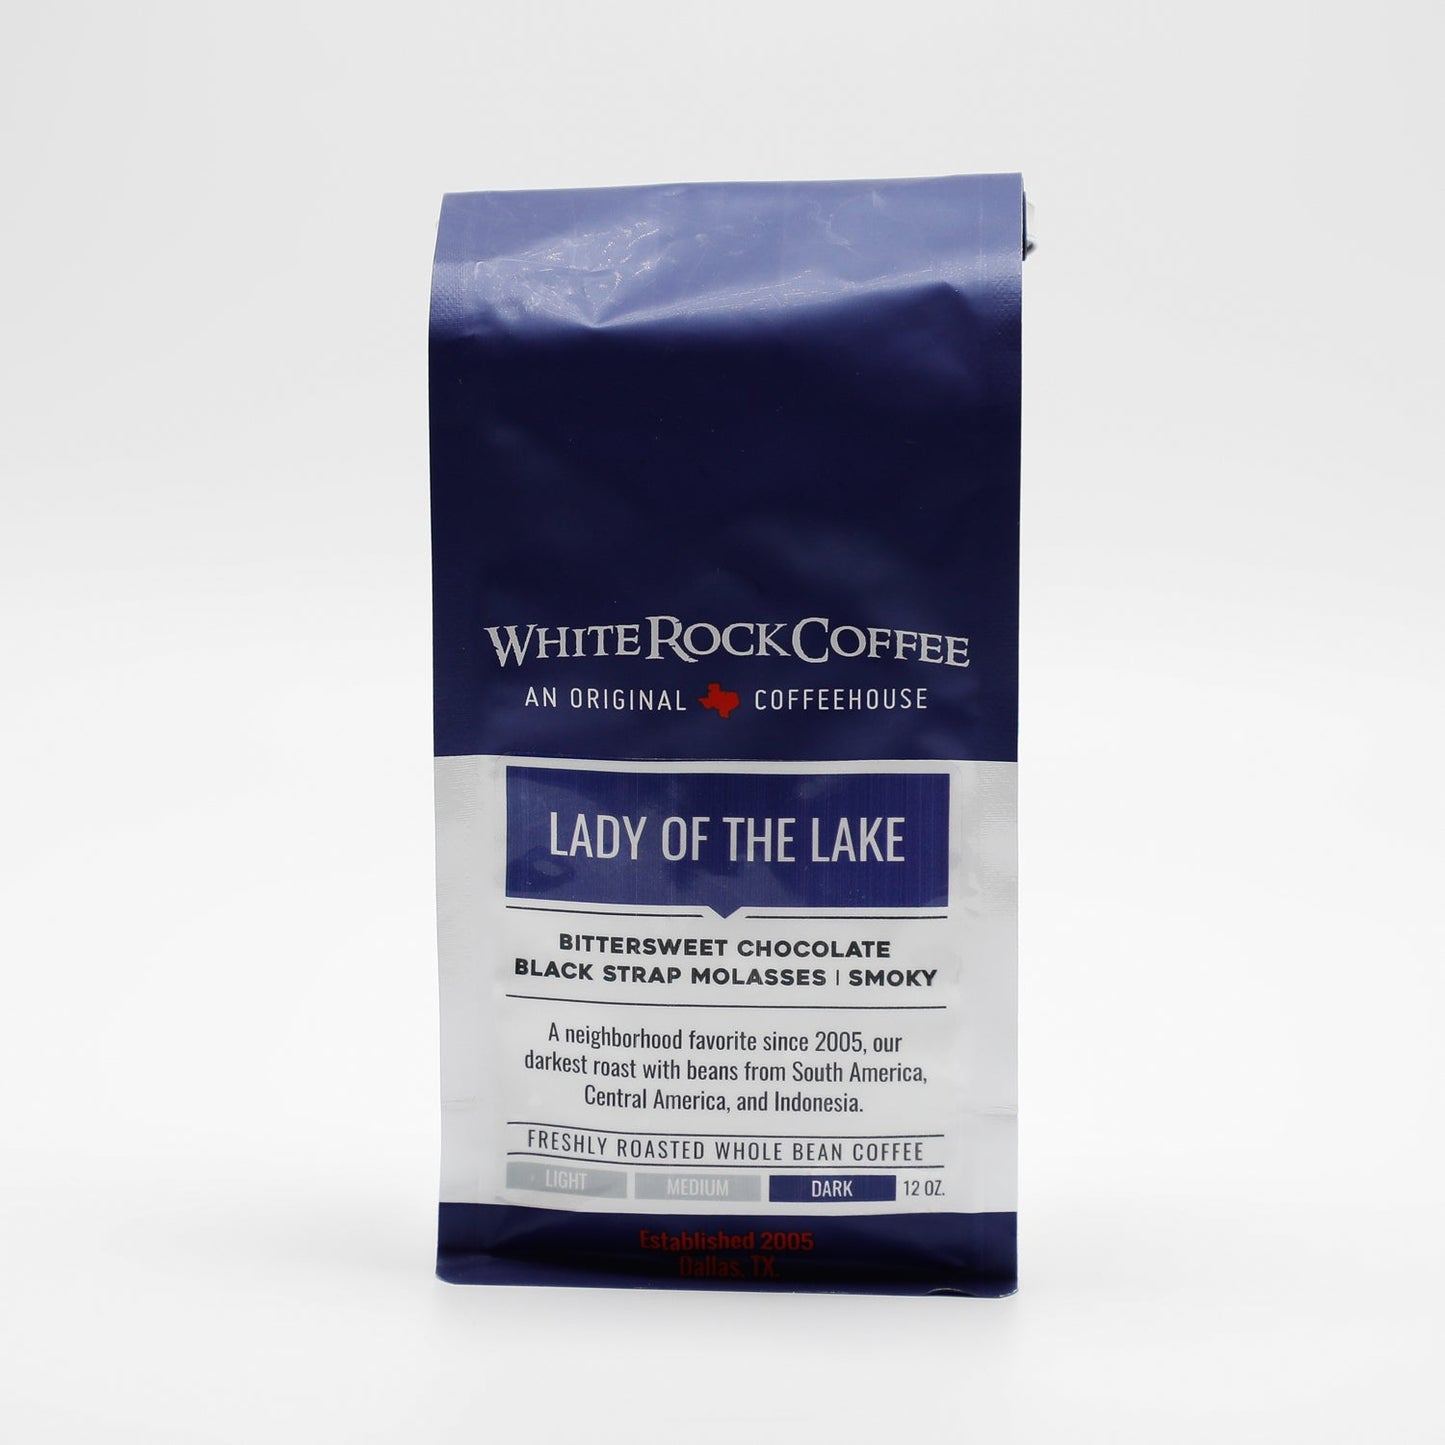 3 Month Coffee Gift Subscription - Lady of the Lake - White Rock Coffee